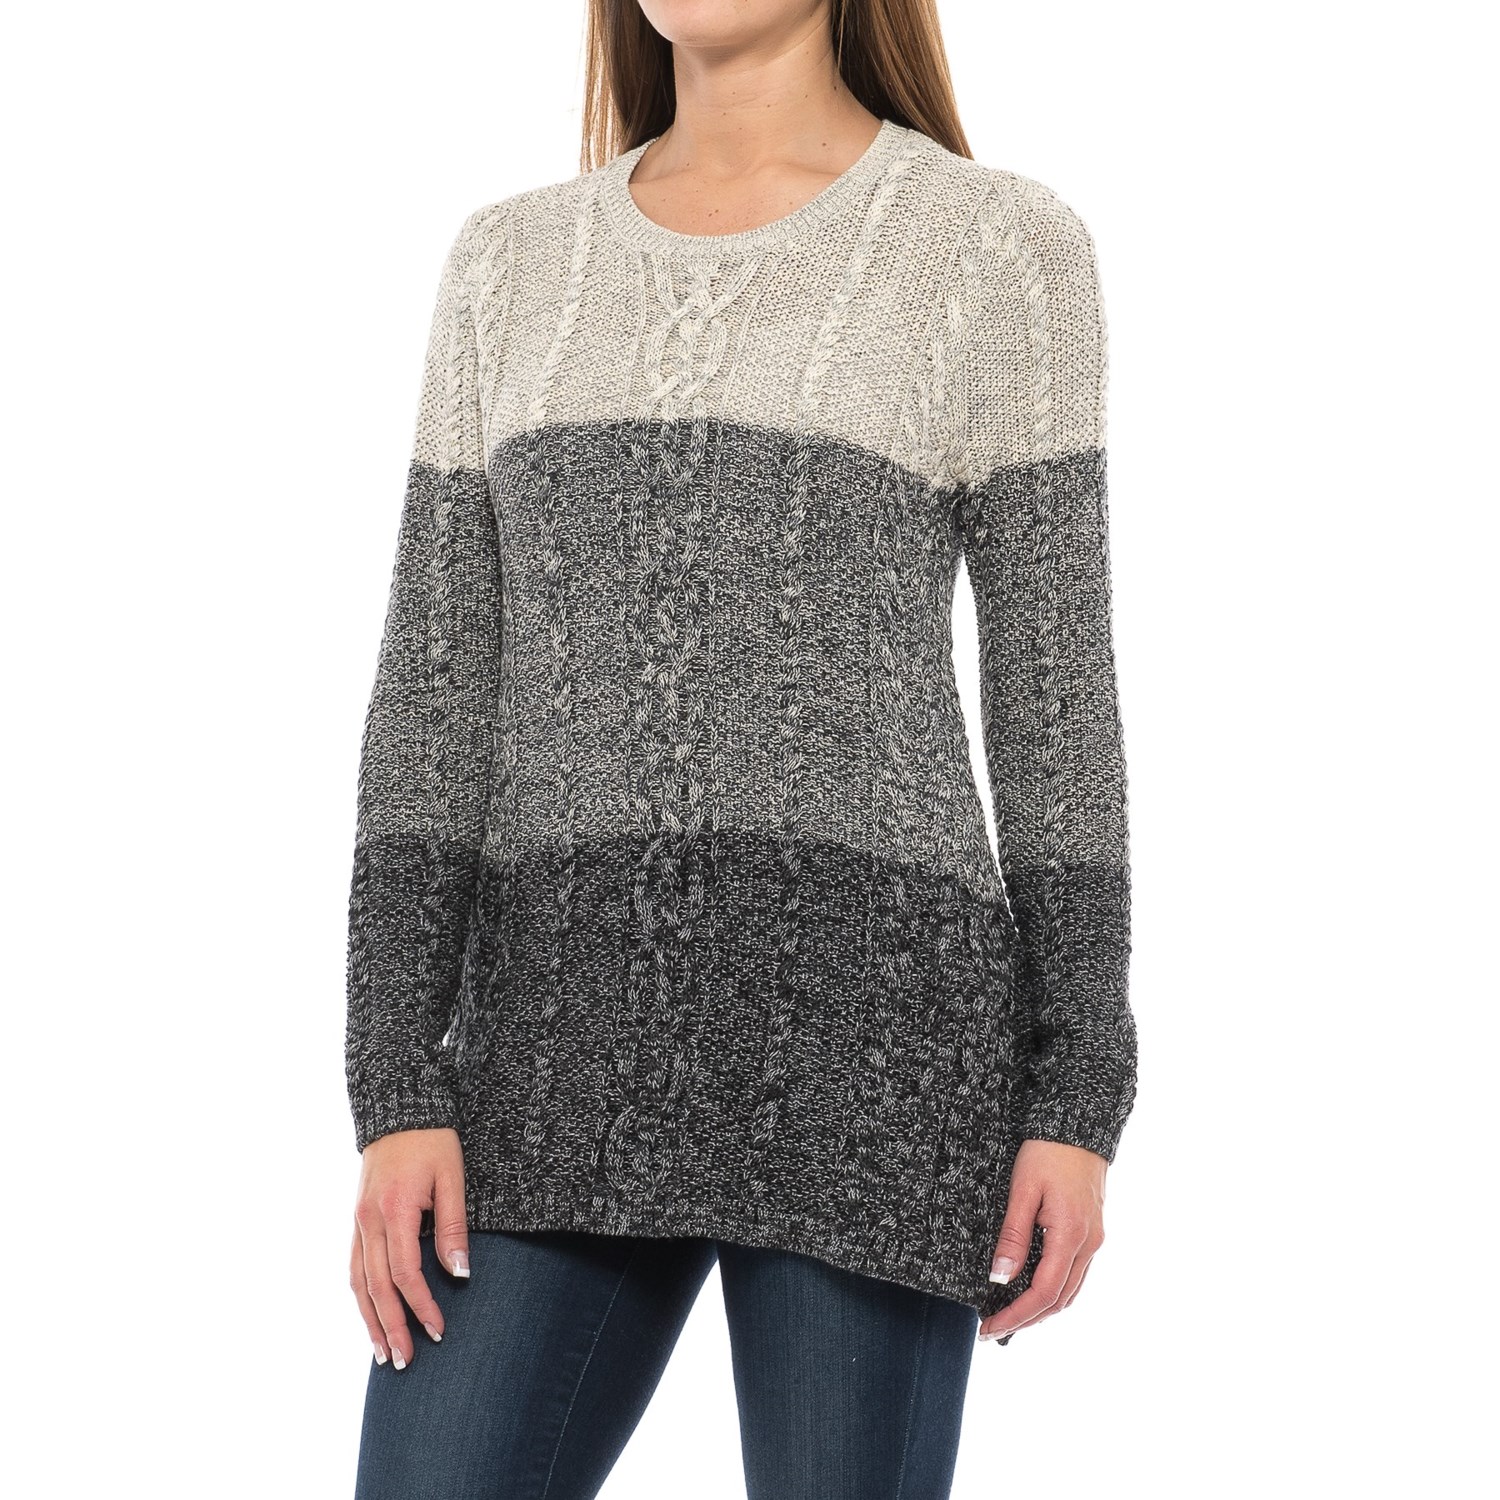 Jeanne Pierre Fisherman Cable Ombre Sweater (For Women) - Save 66%